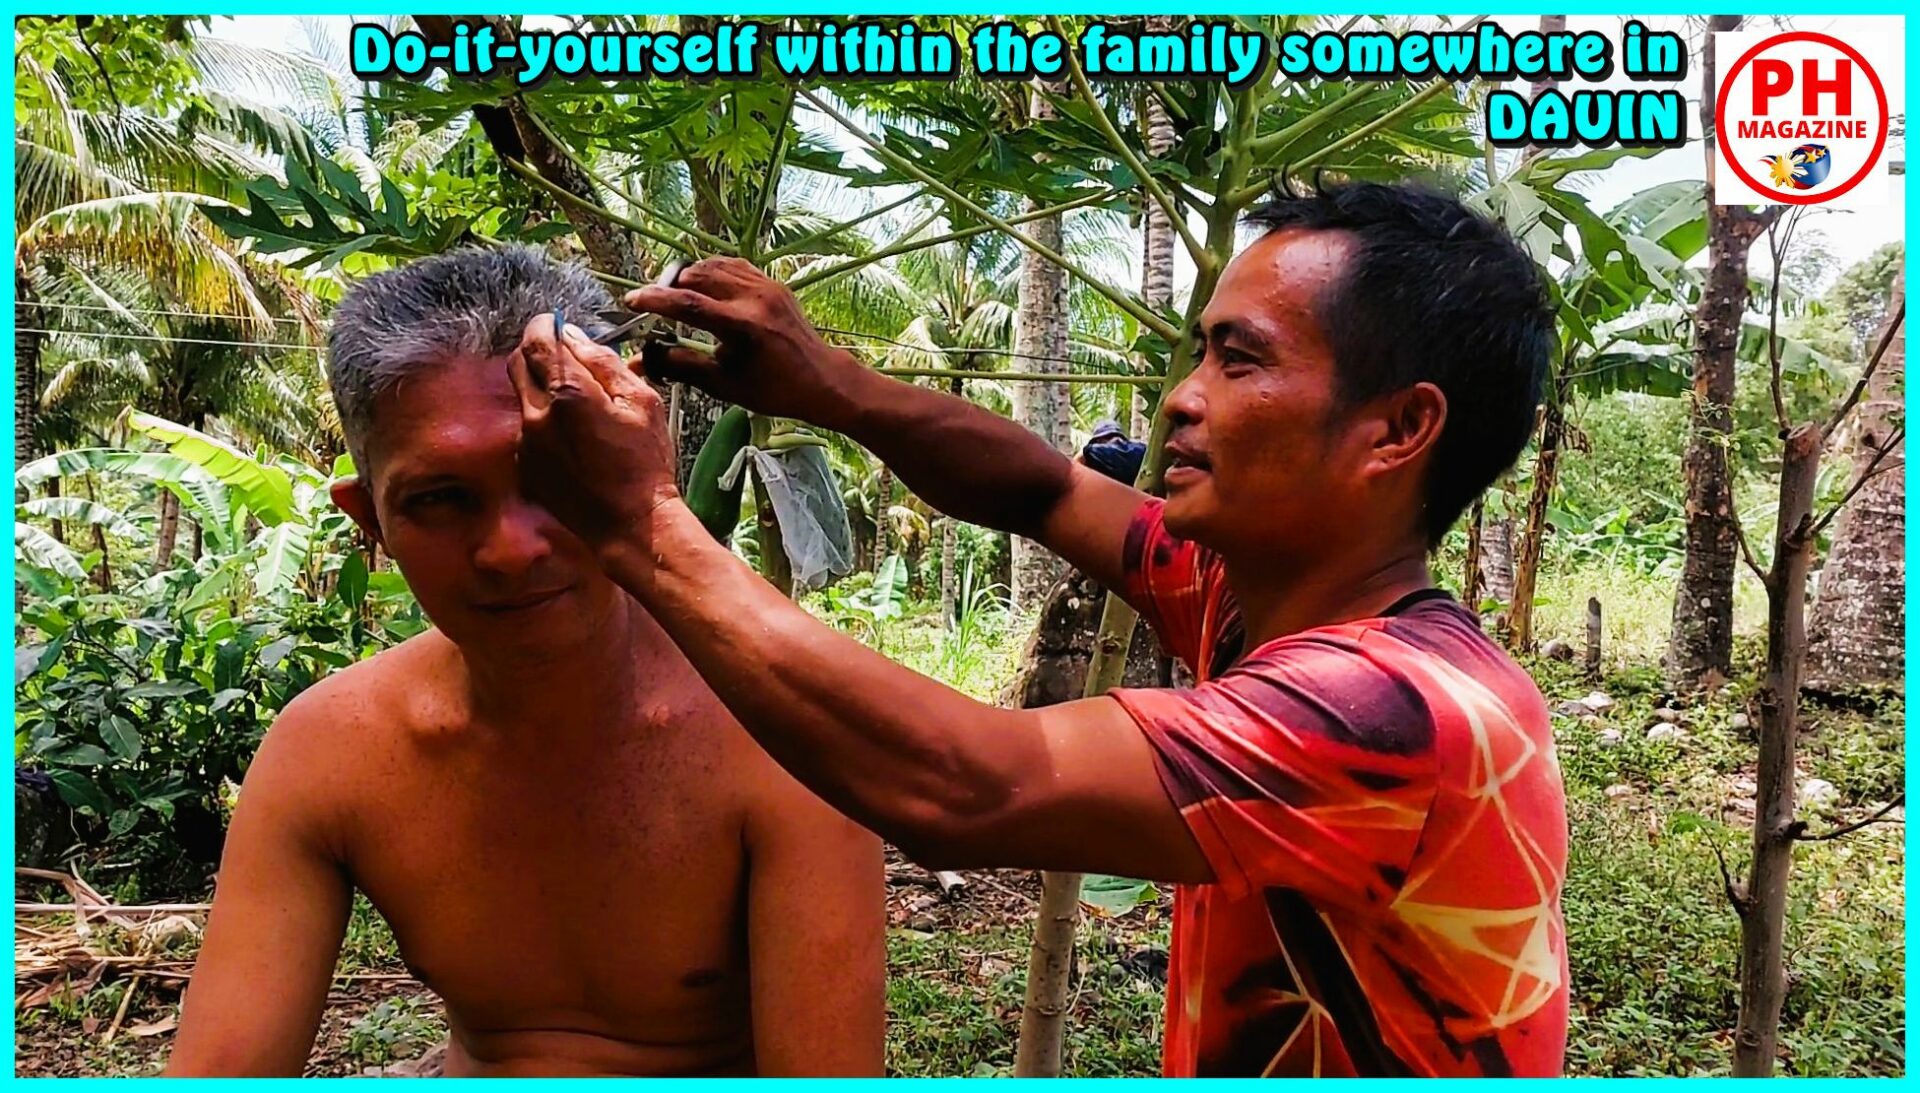 SIGHTS OF NEGROS - PHOTO OF THE DAY - Do-it-yourself within the family somewhere in Dauin